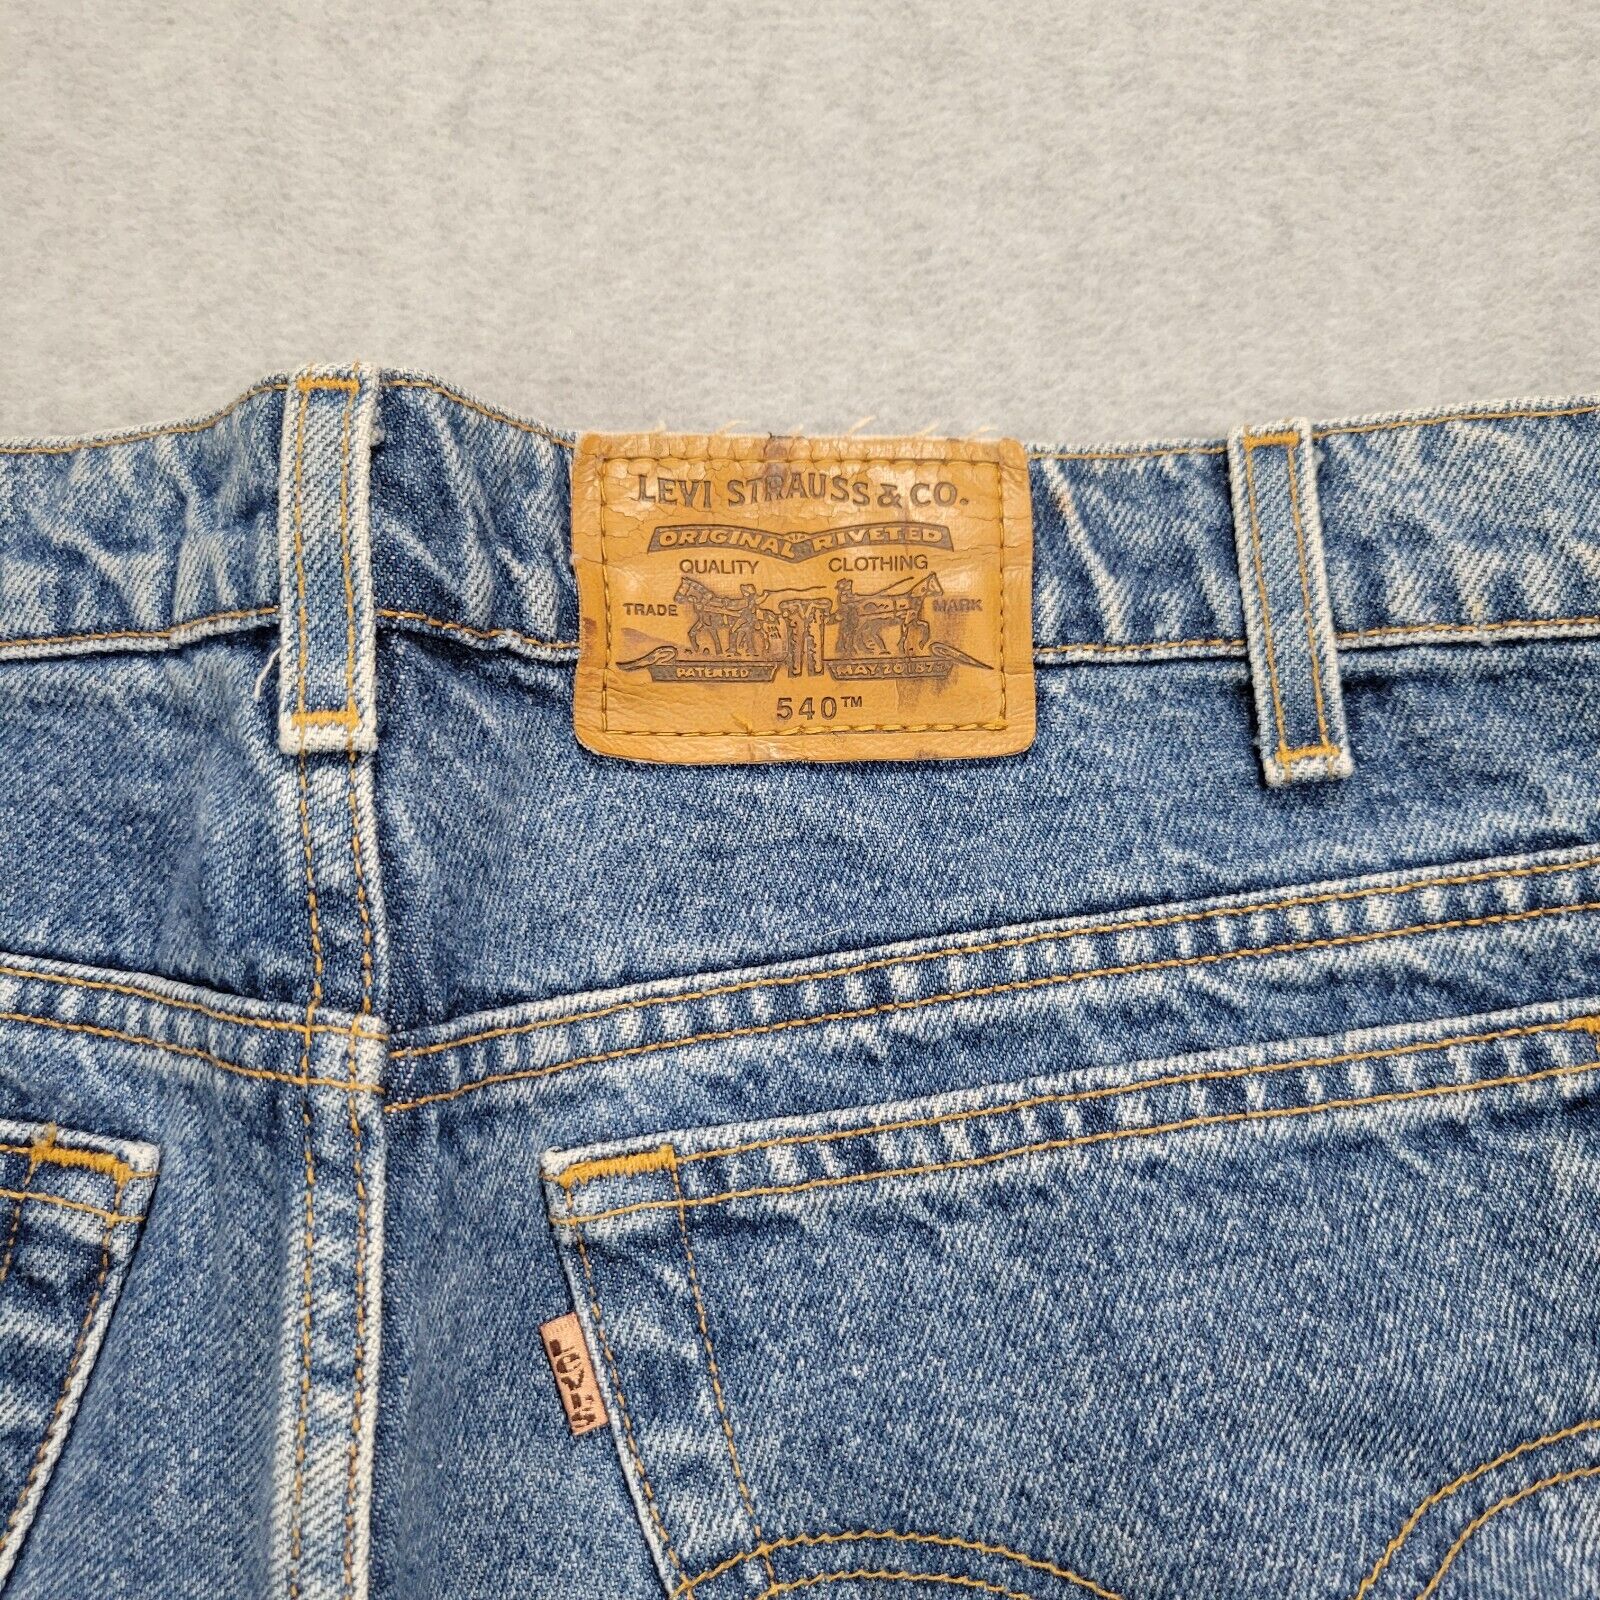 Levis 540 Brown Tab 36x31 Blue Jeans Men's Relaxe… - image 8